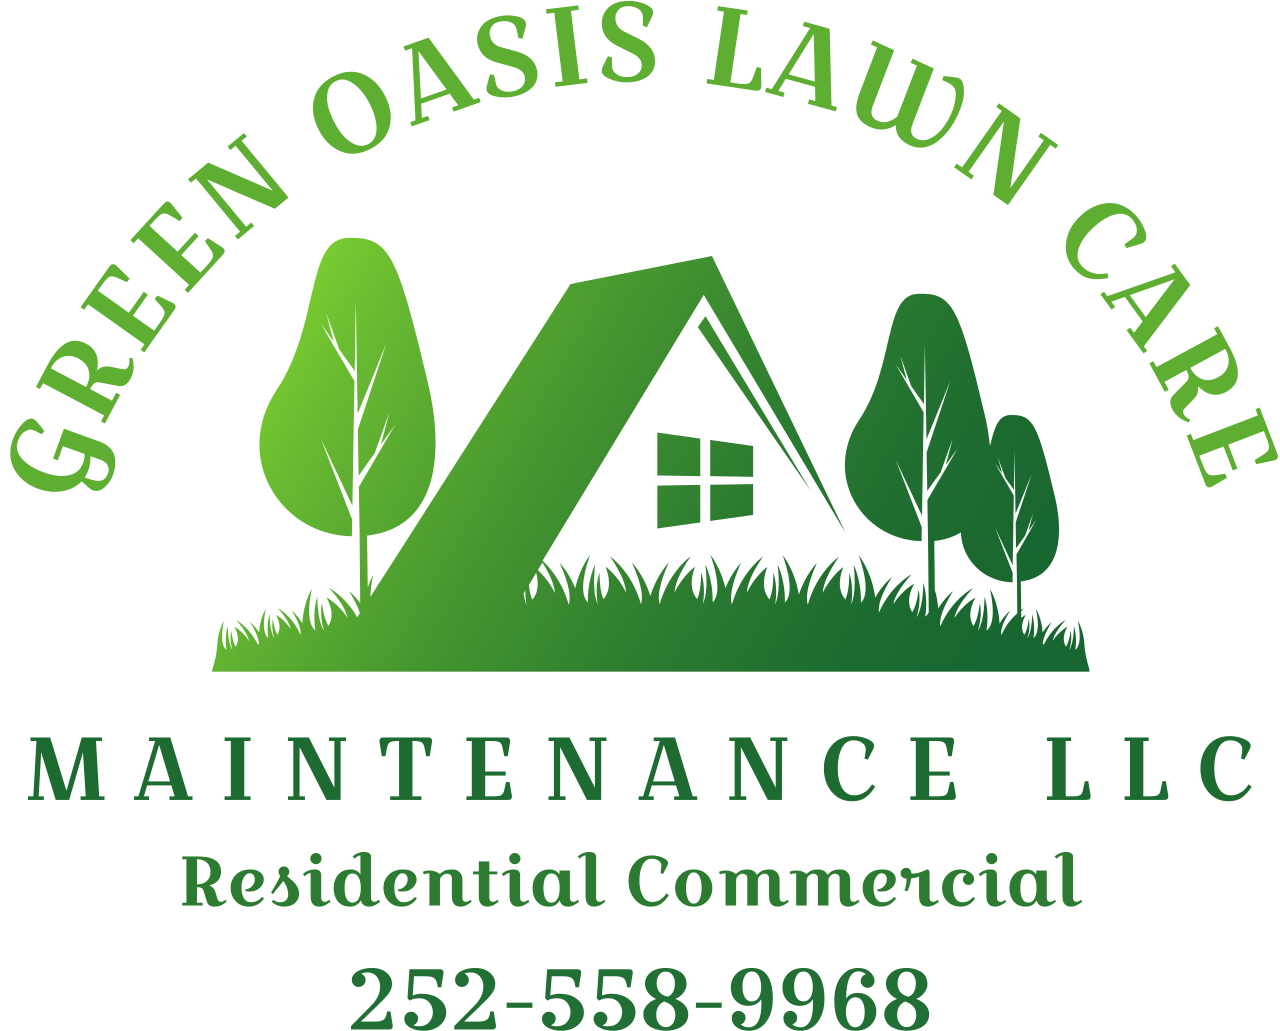 green oasis lawn care 's logo